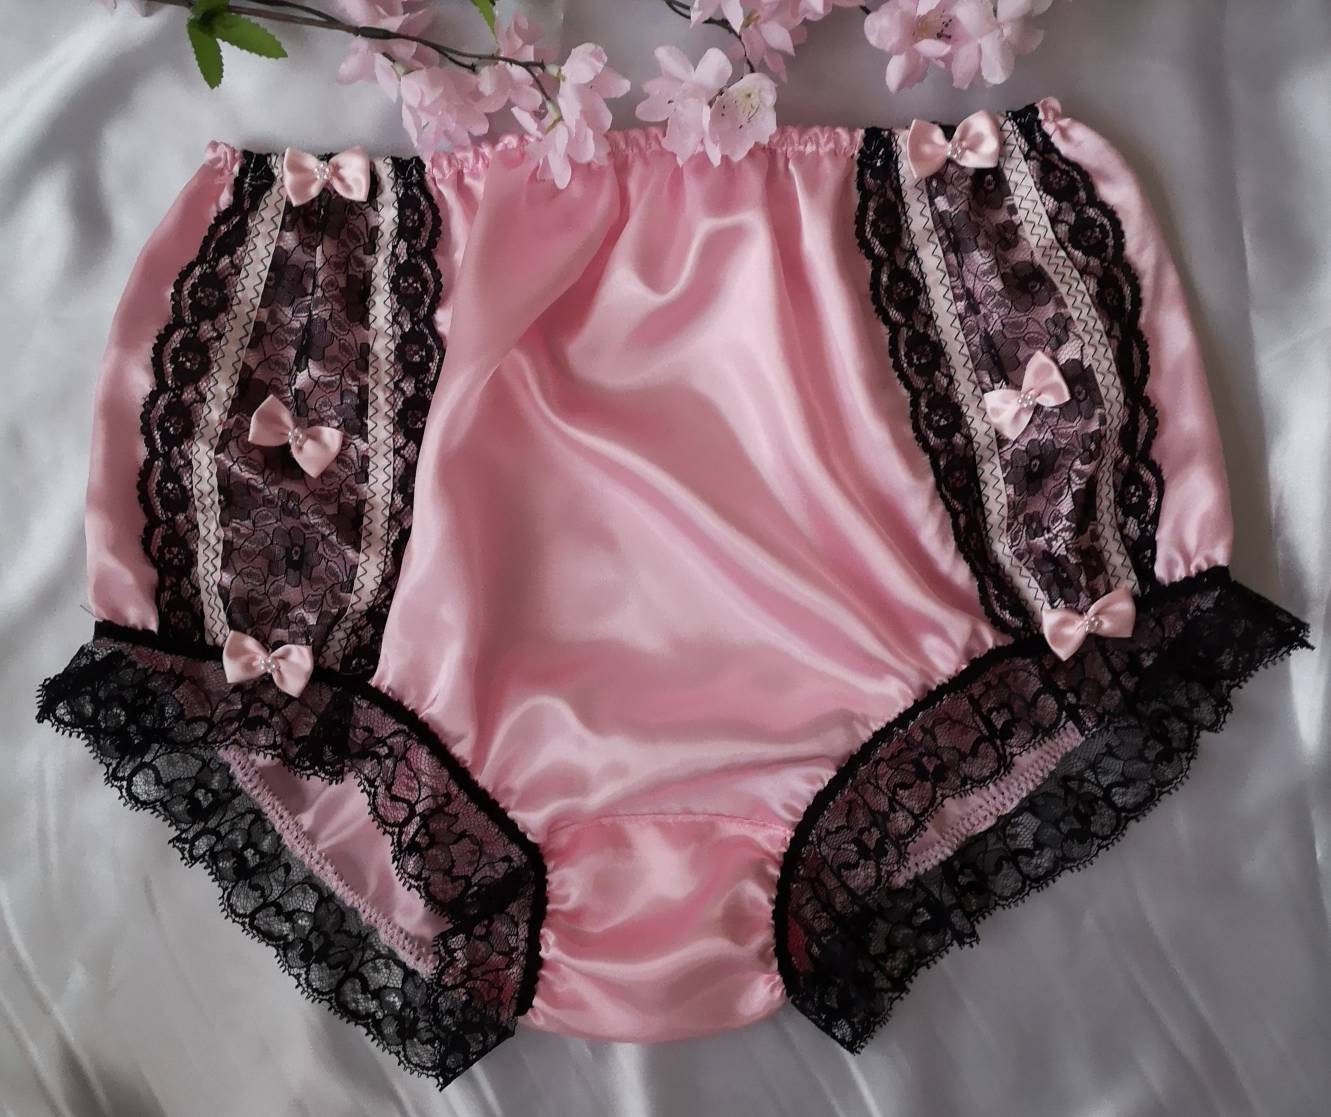 Pink Satin Lace French Knickers Underwear Sissy Satin Panties Size 26 19 